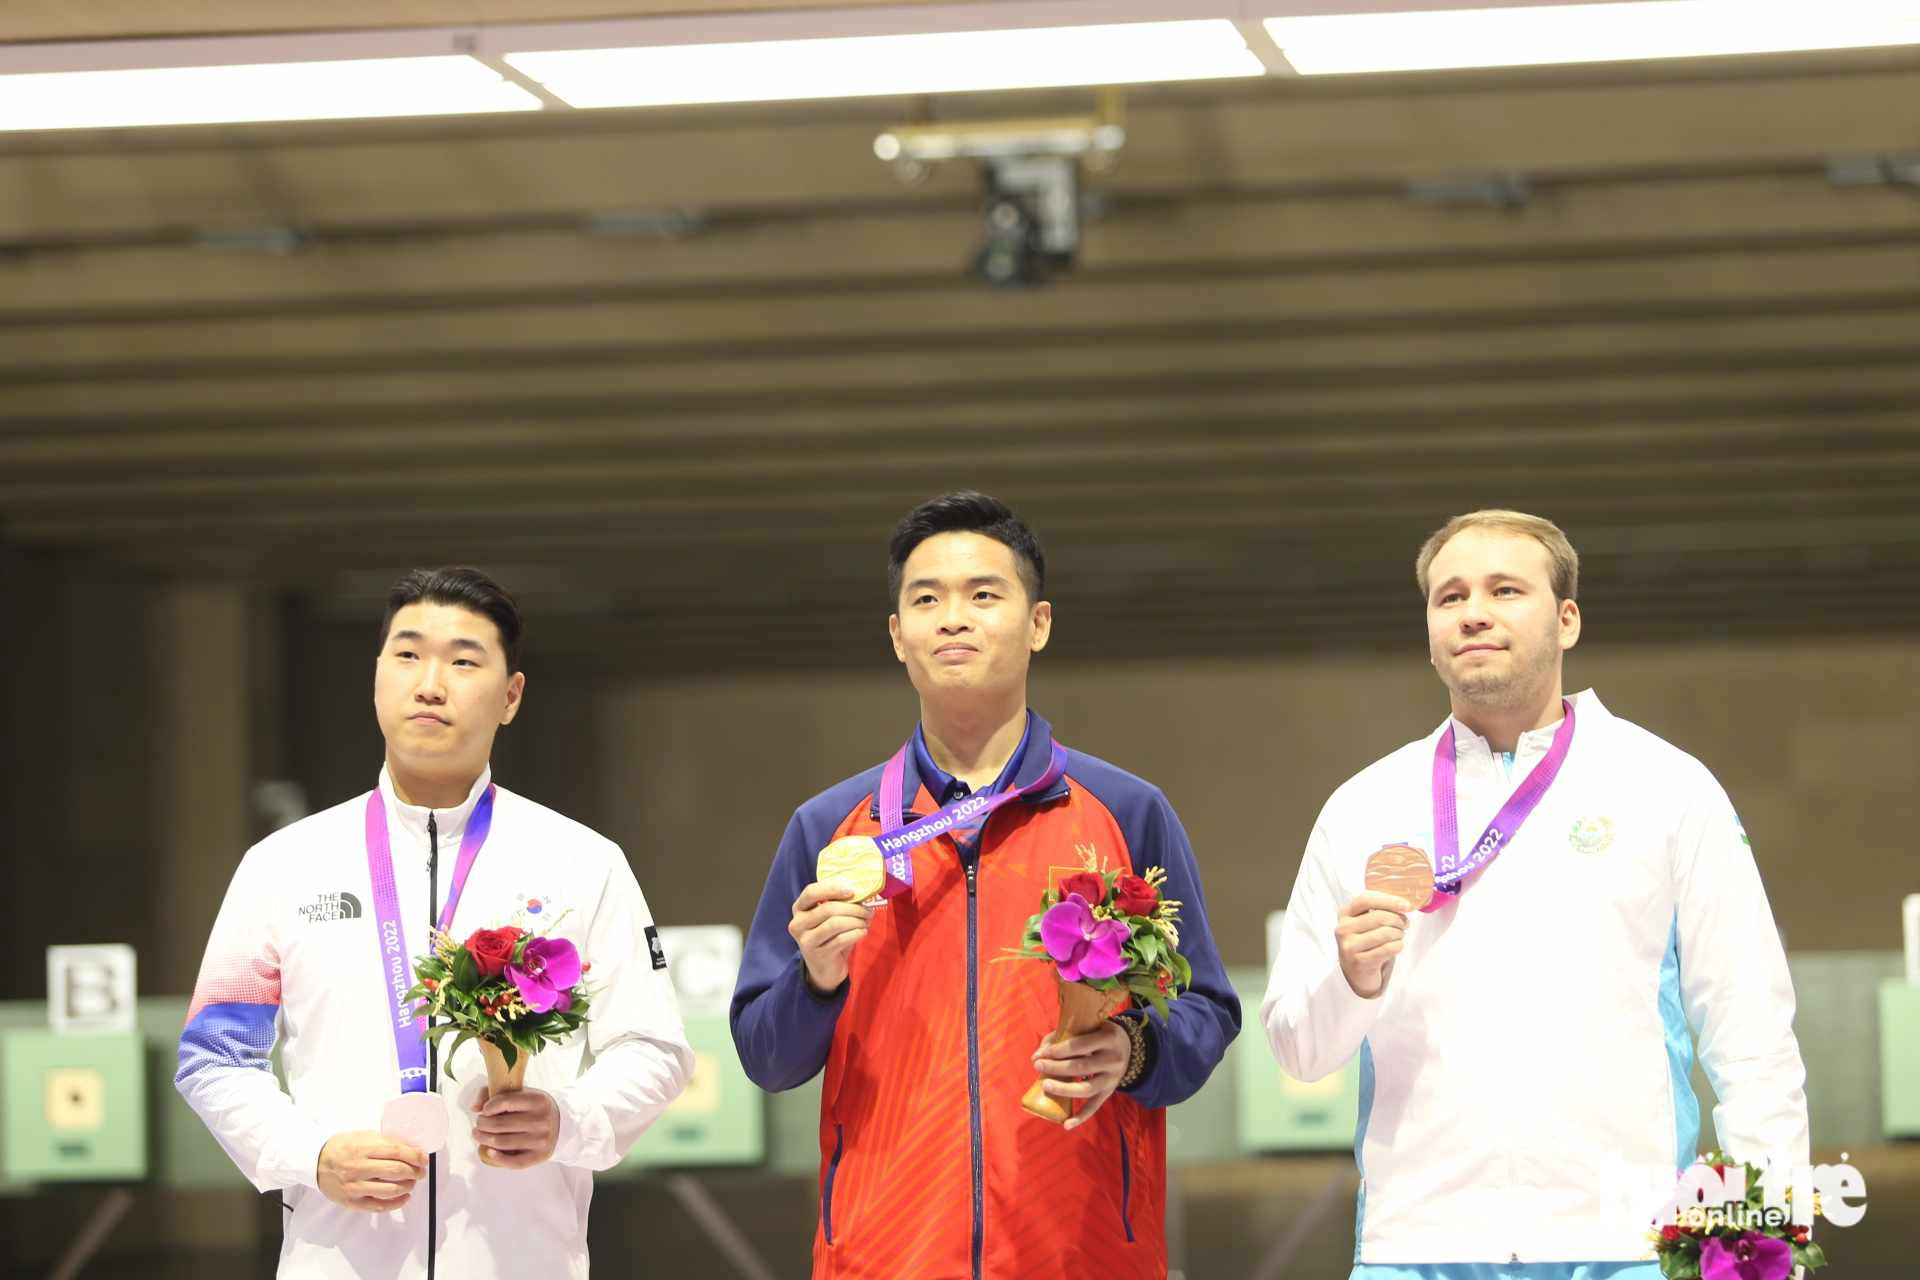 Shooter wins Vietnam’s first gold medal at Asian Games in China